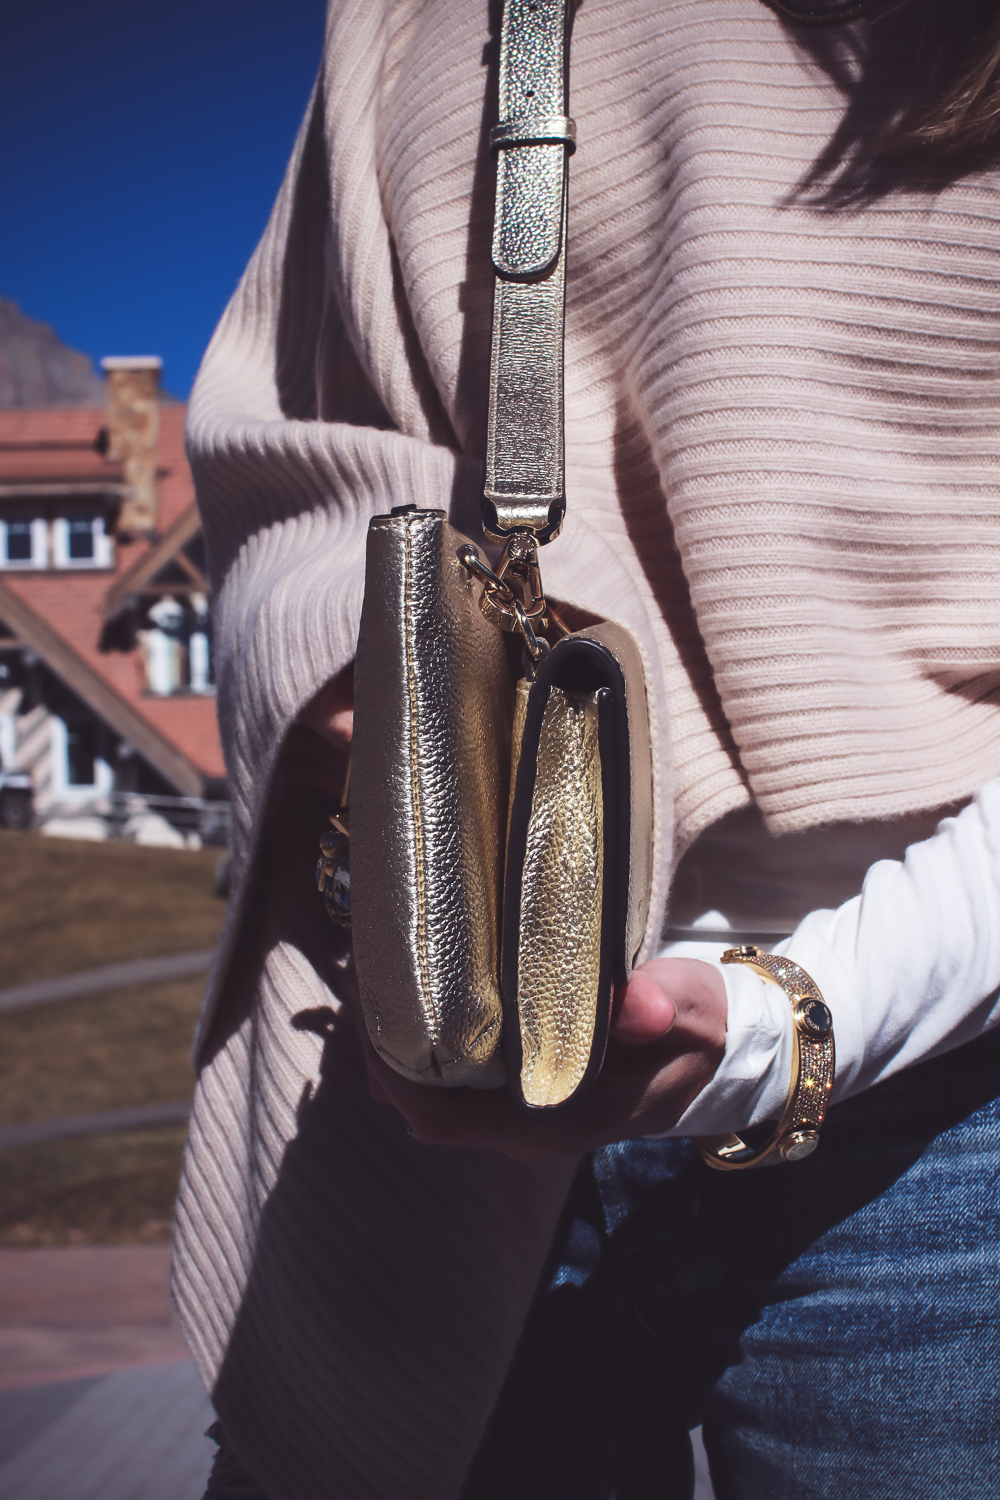 Personalize your handbag like a charm necklace with Henri Bendel, Erin Busbee, fashion blogger from Busbee Style shows you one 2-in-1 bag option (wallet and crossbody bag) with charms unique to her in Telluride Colorado